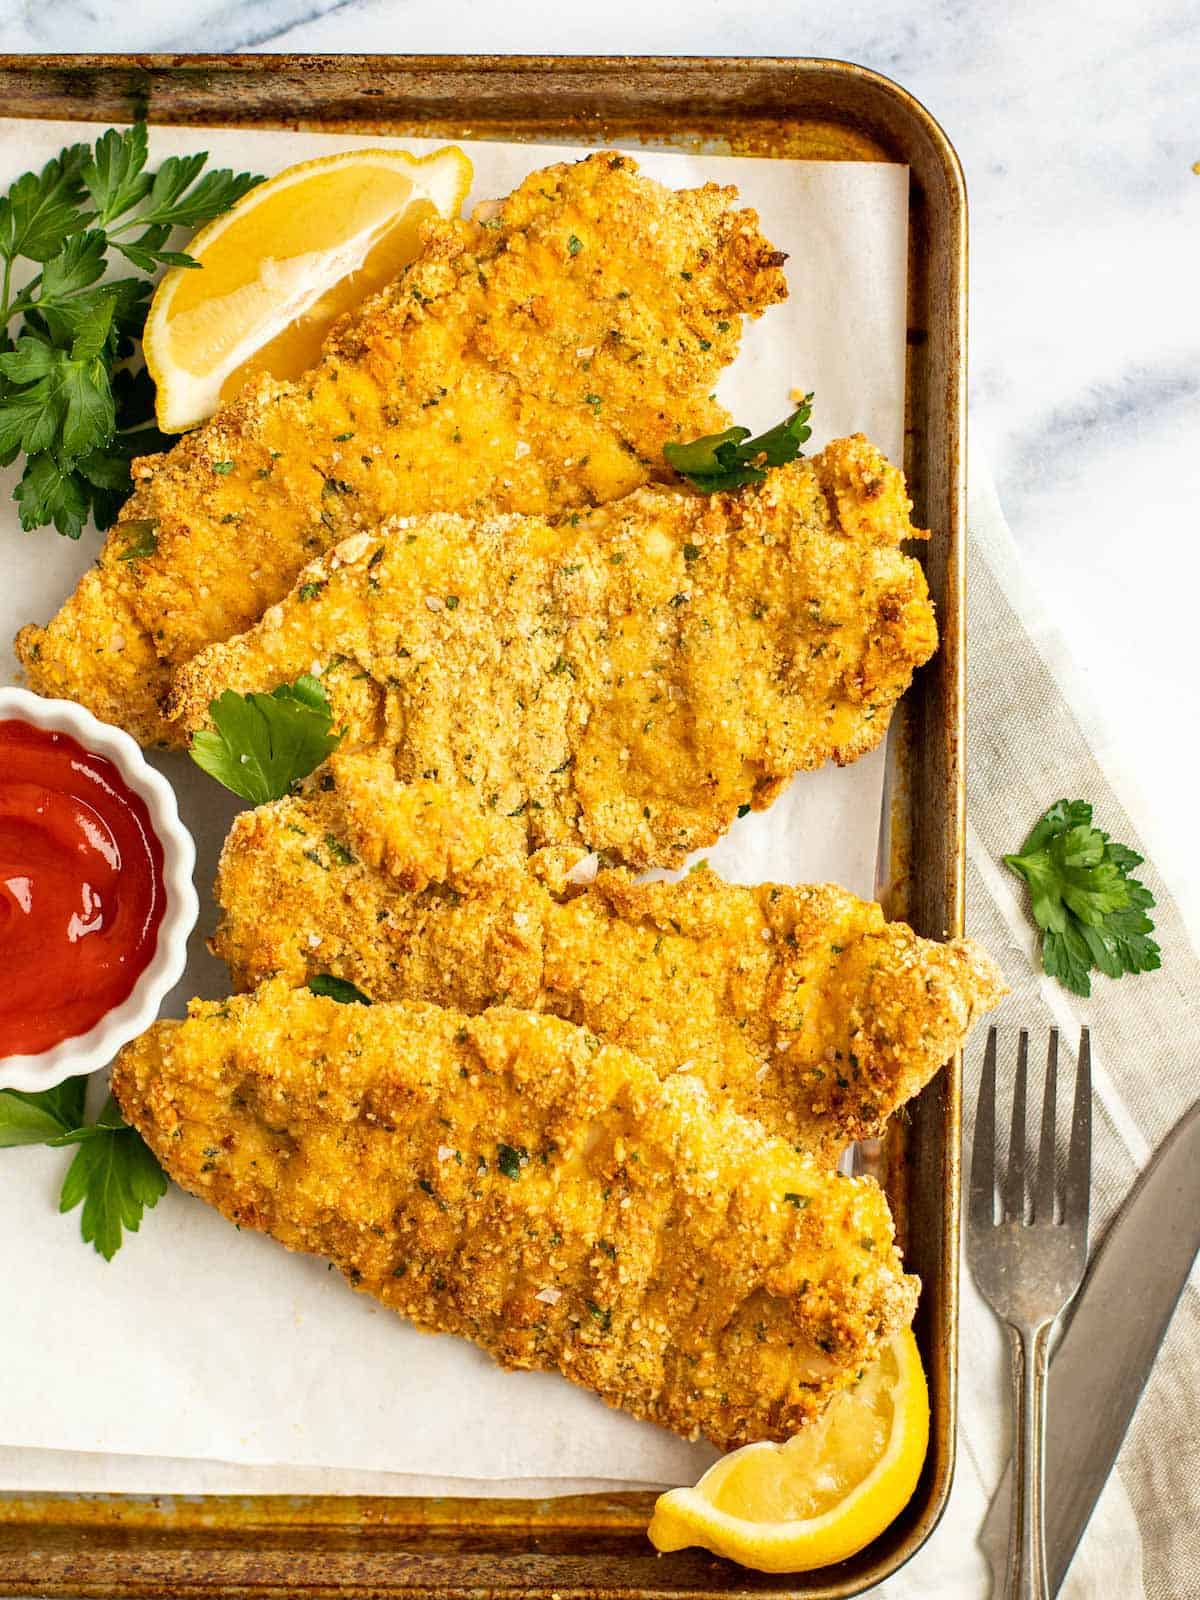 Crispy chicken schnitzel on a baking tray with parsley, lemon, and a dipping sauce.